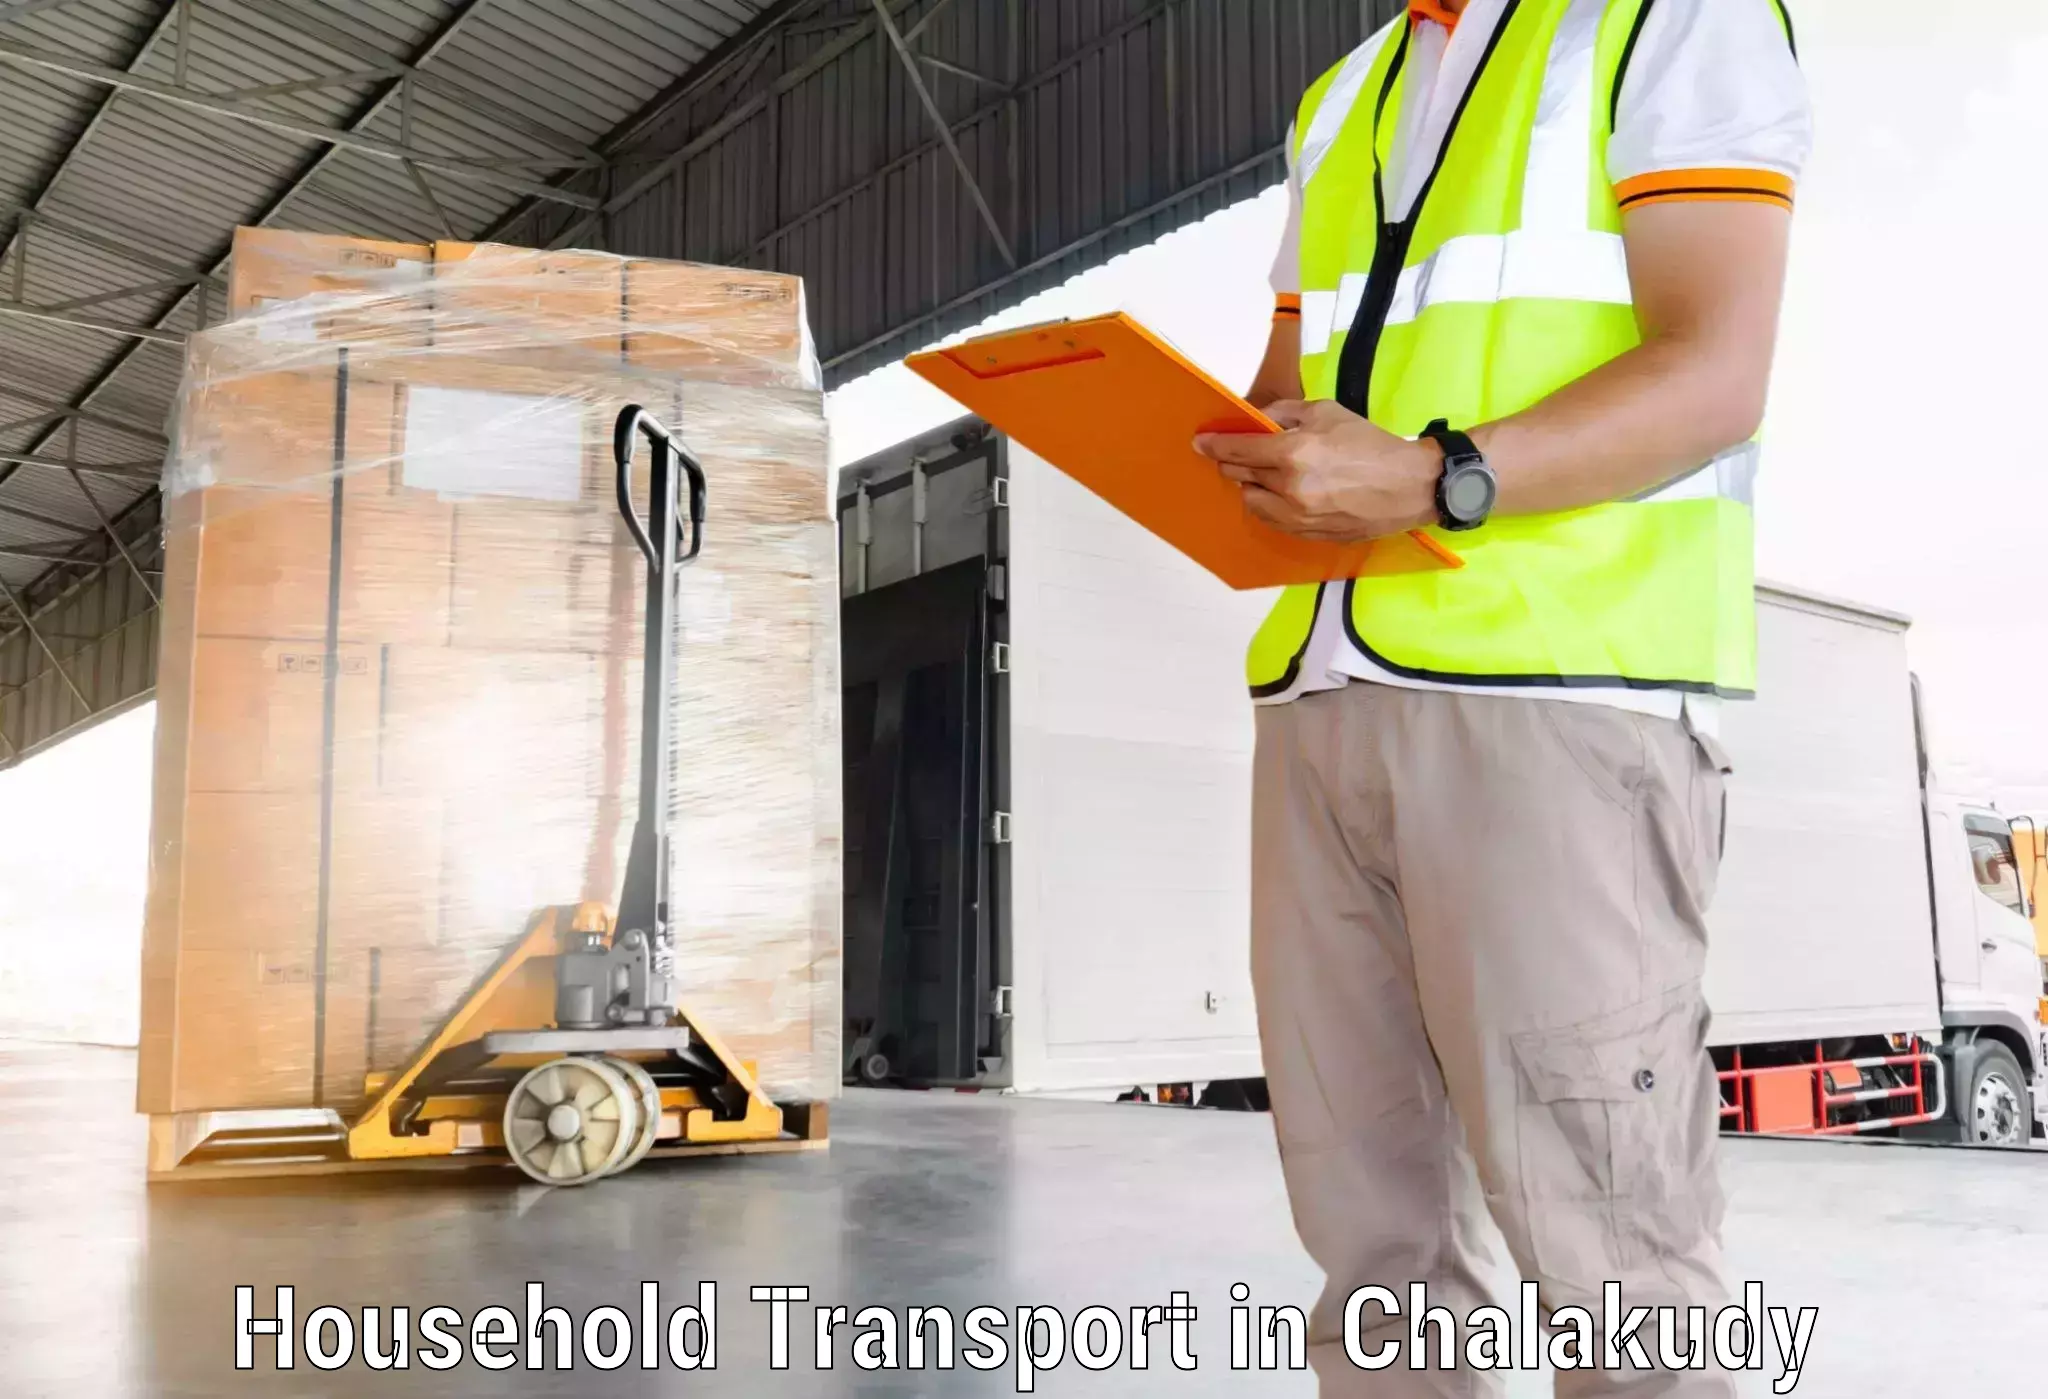 Reliable relocation services in Chalakudy